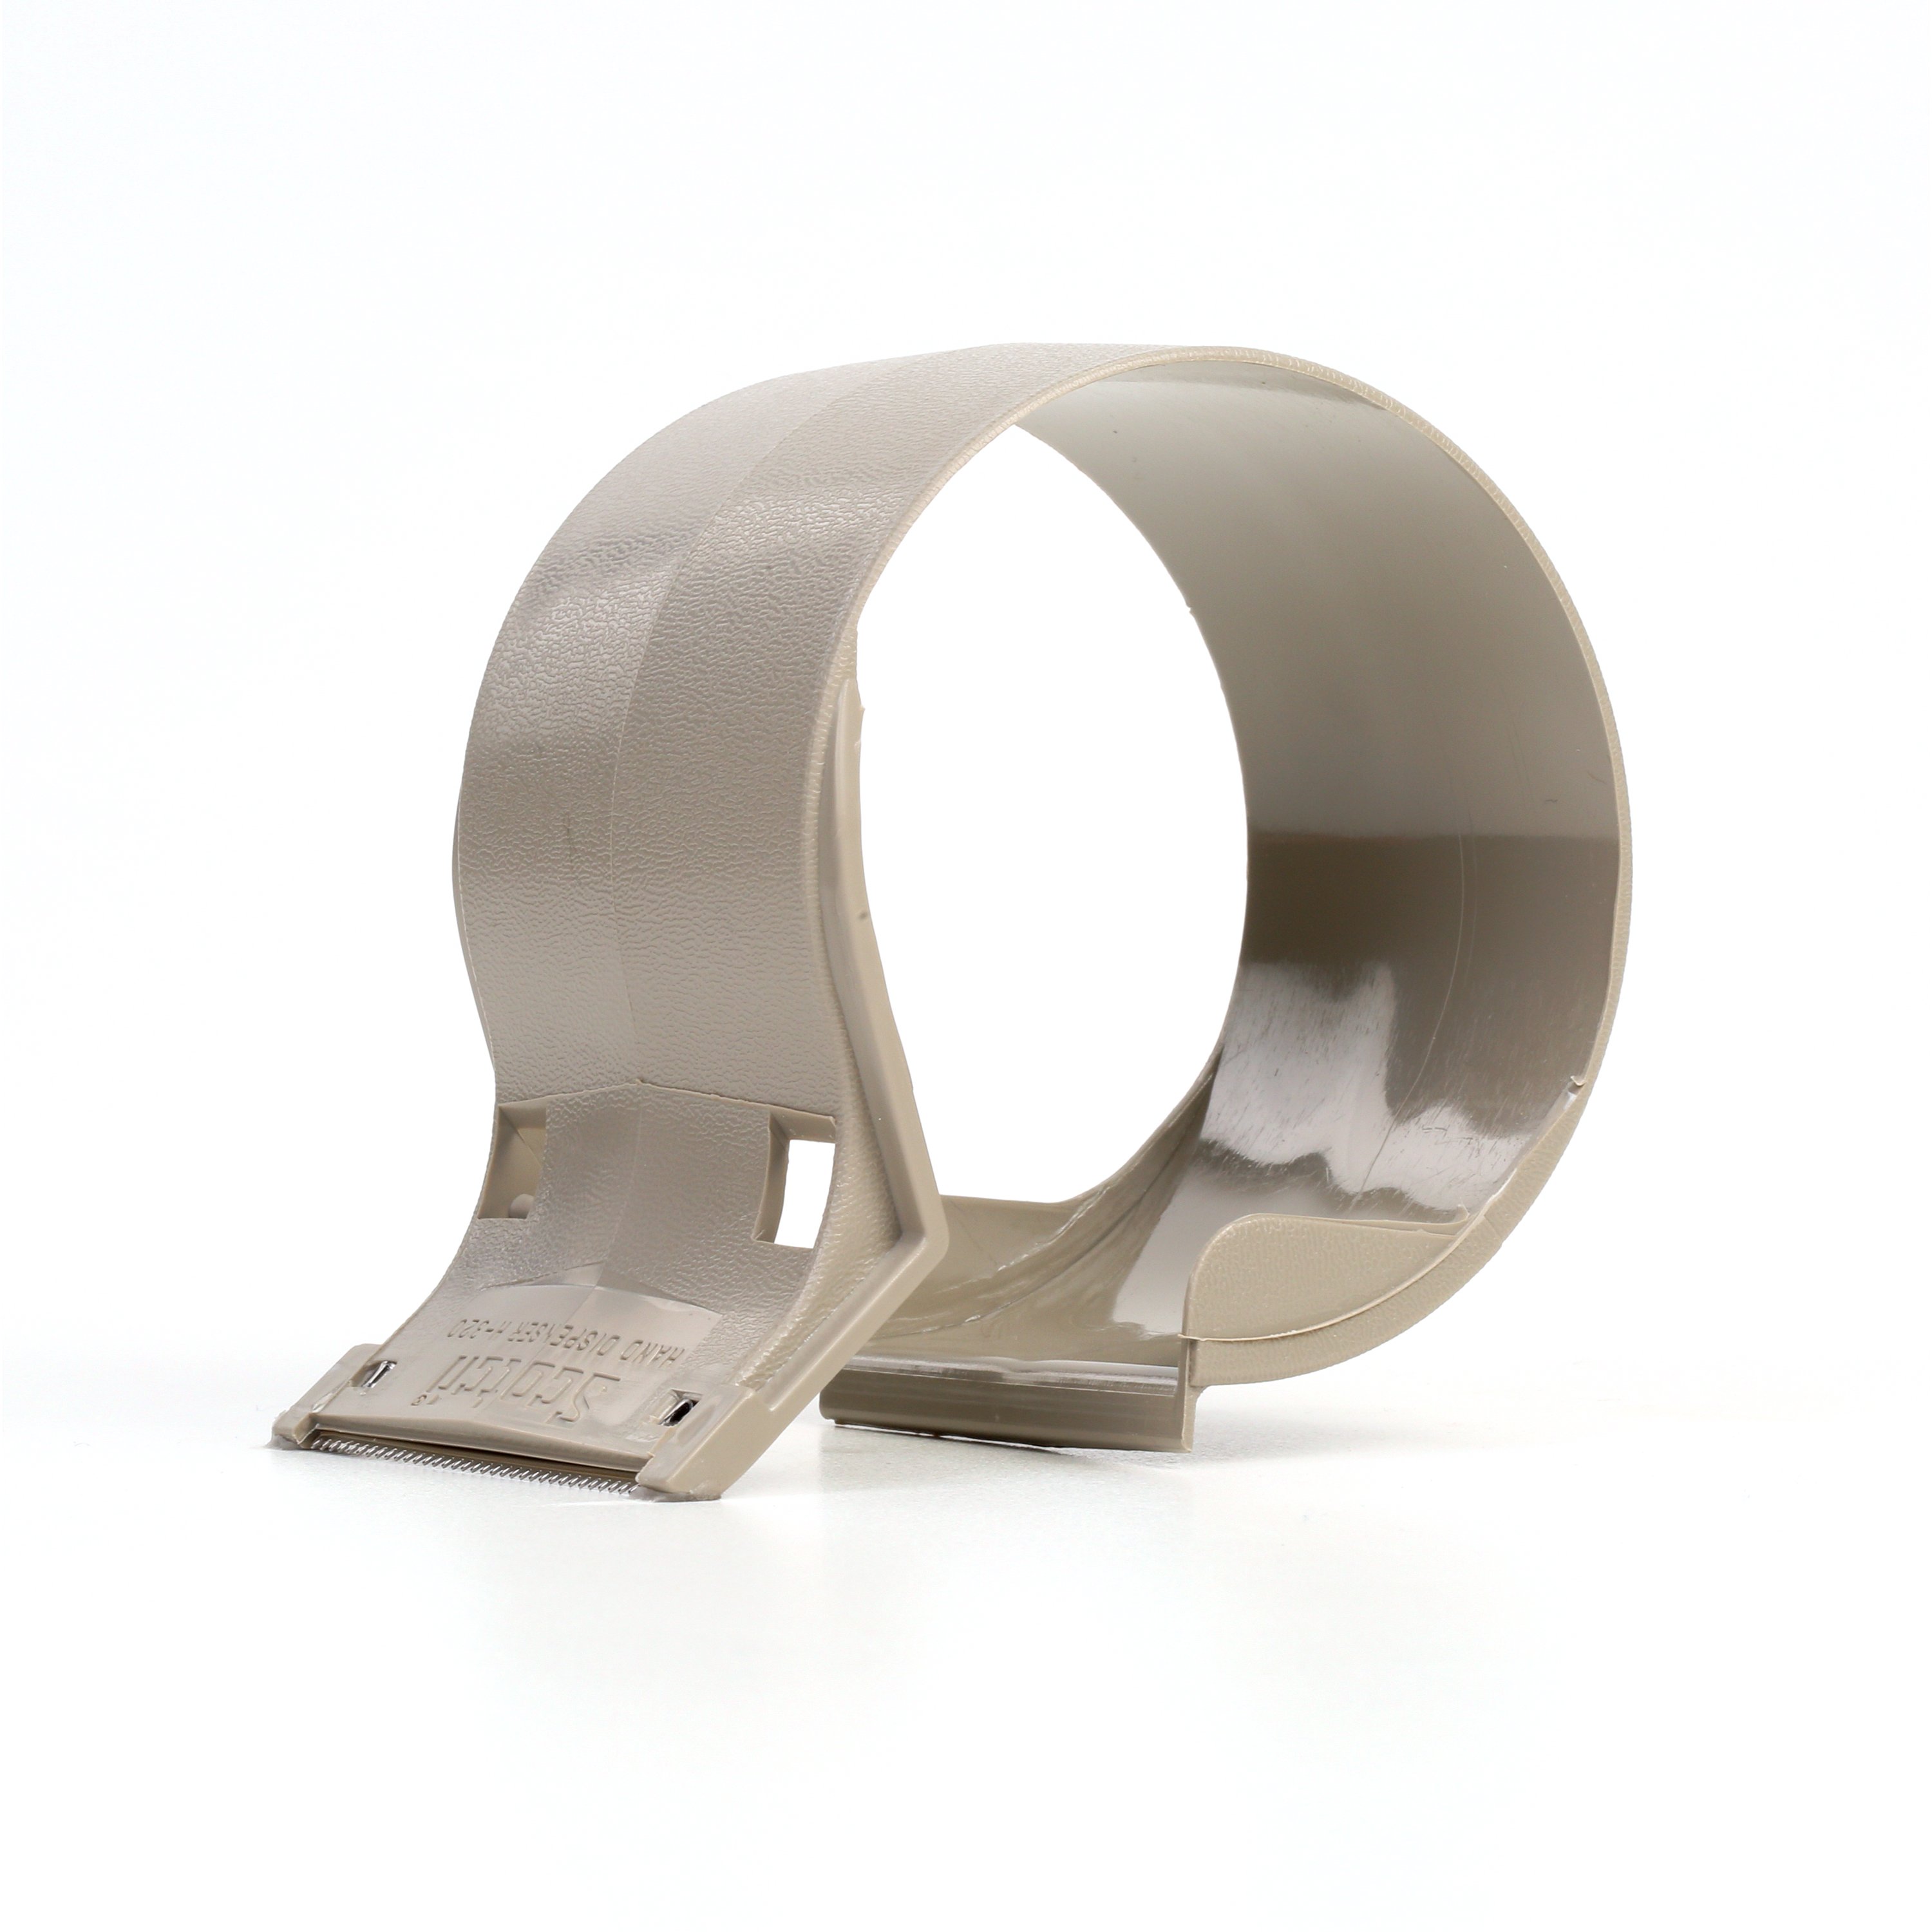 Scotch® Box Sealing Tape Dispenser H320 for combining, reinforcing, and bundling operations.